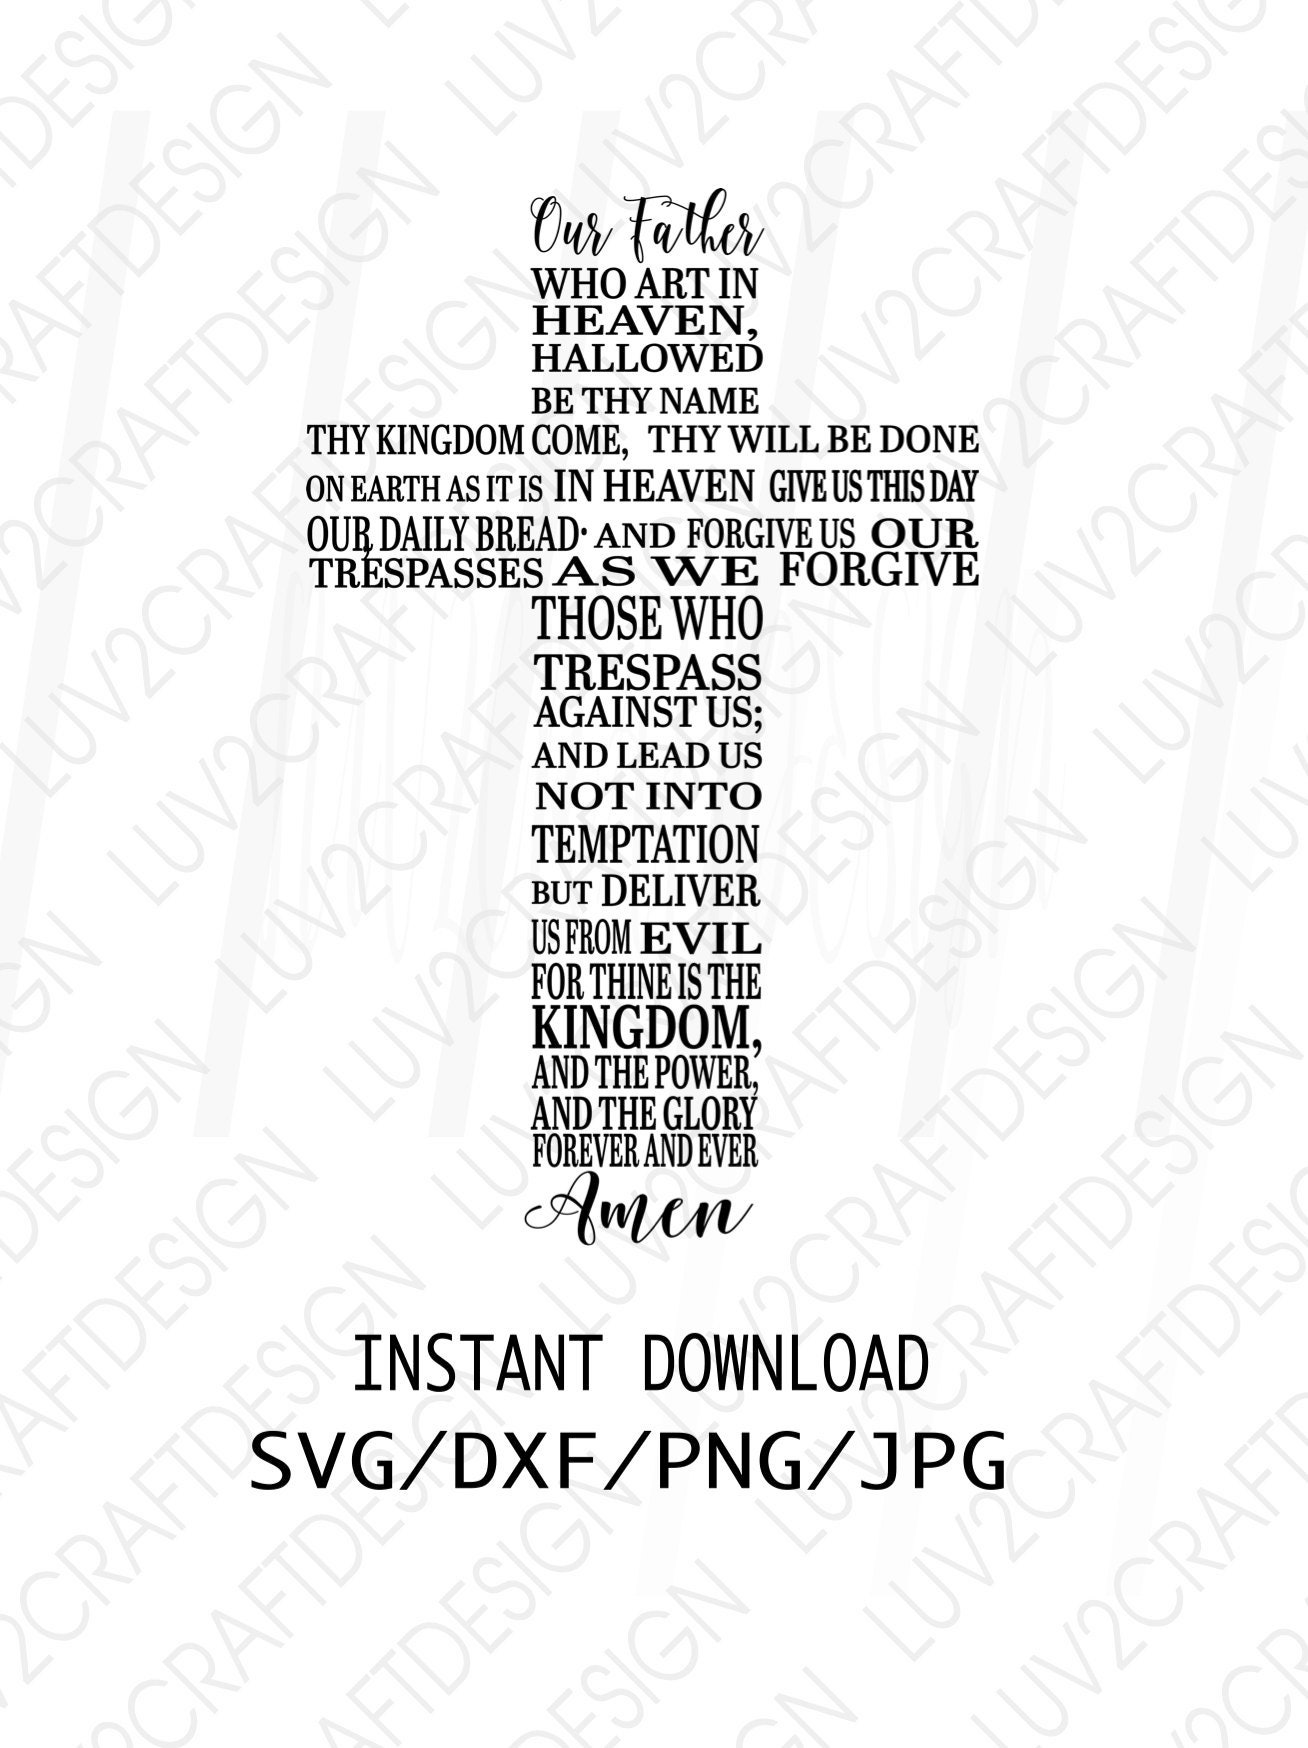 art-collectibles-drawing-illustration-the-lord-s-prayer-svg-digital